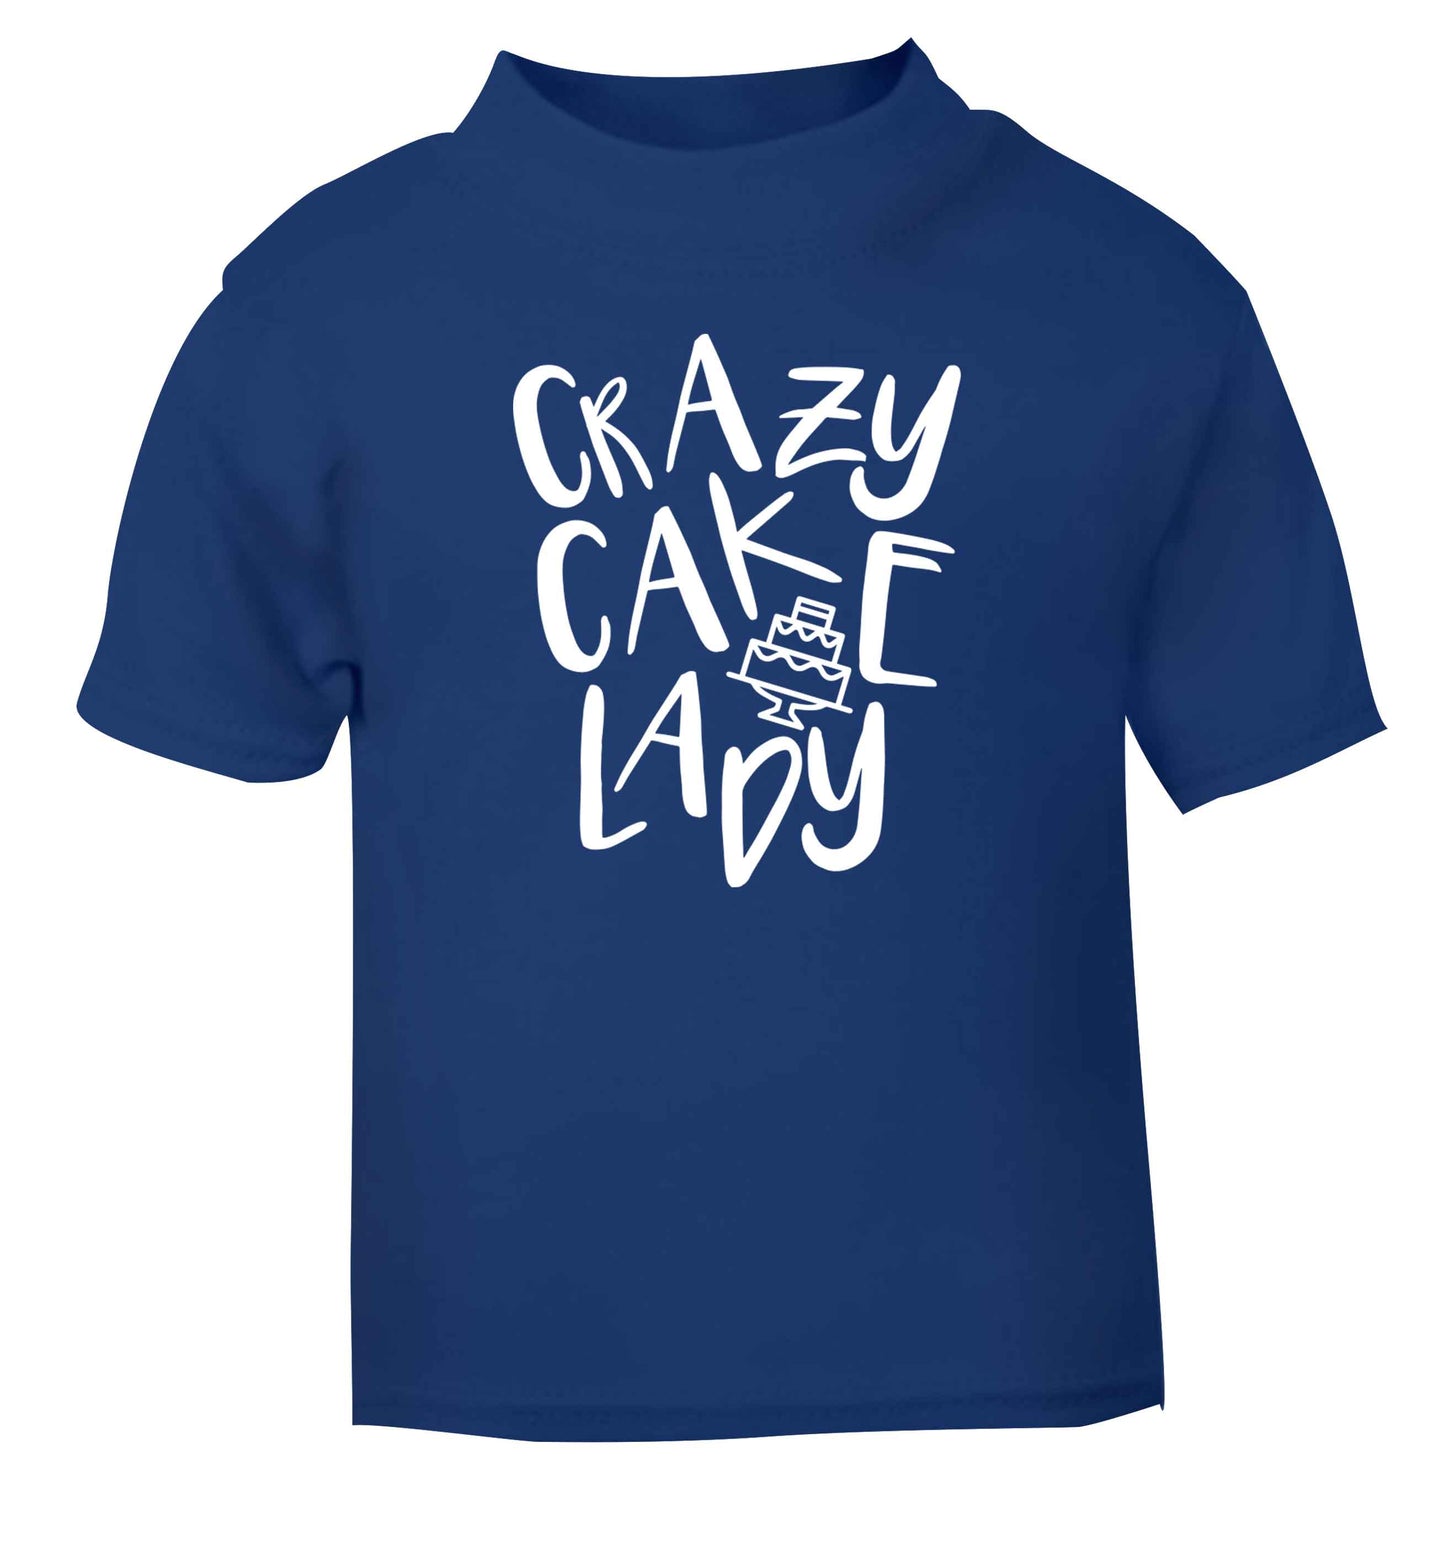 Crazy cake lady blue Baby Toddler Tshirt 2 Years